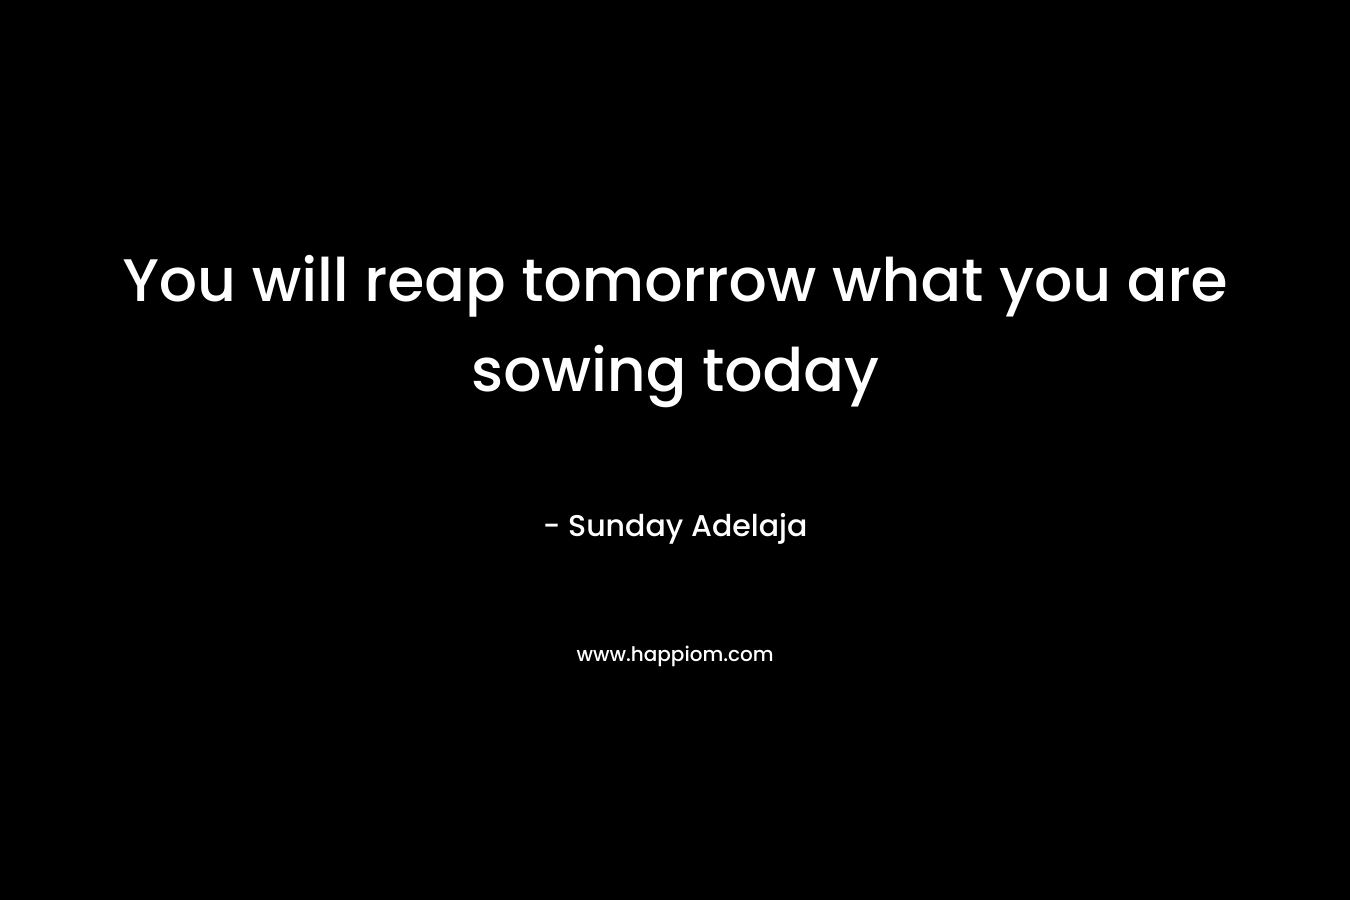 You will reap tomorrow what you are sowing today